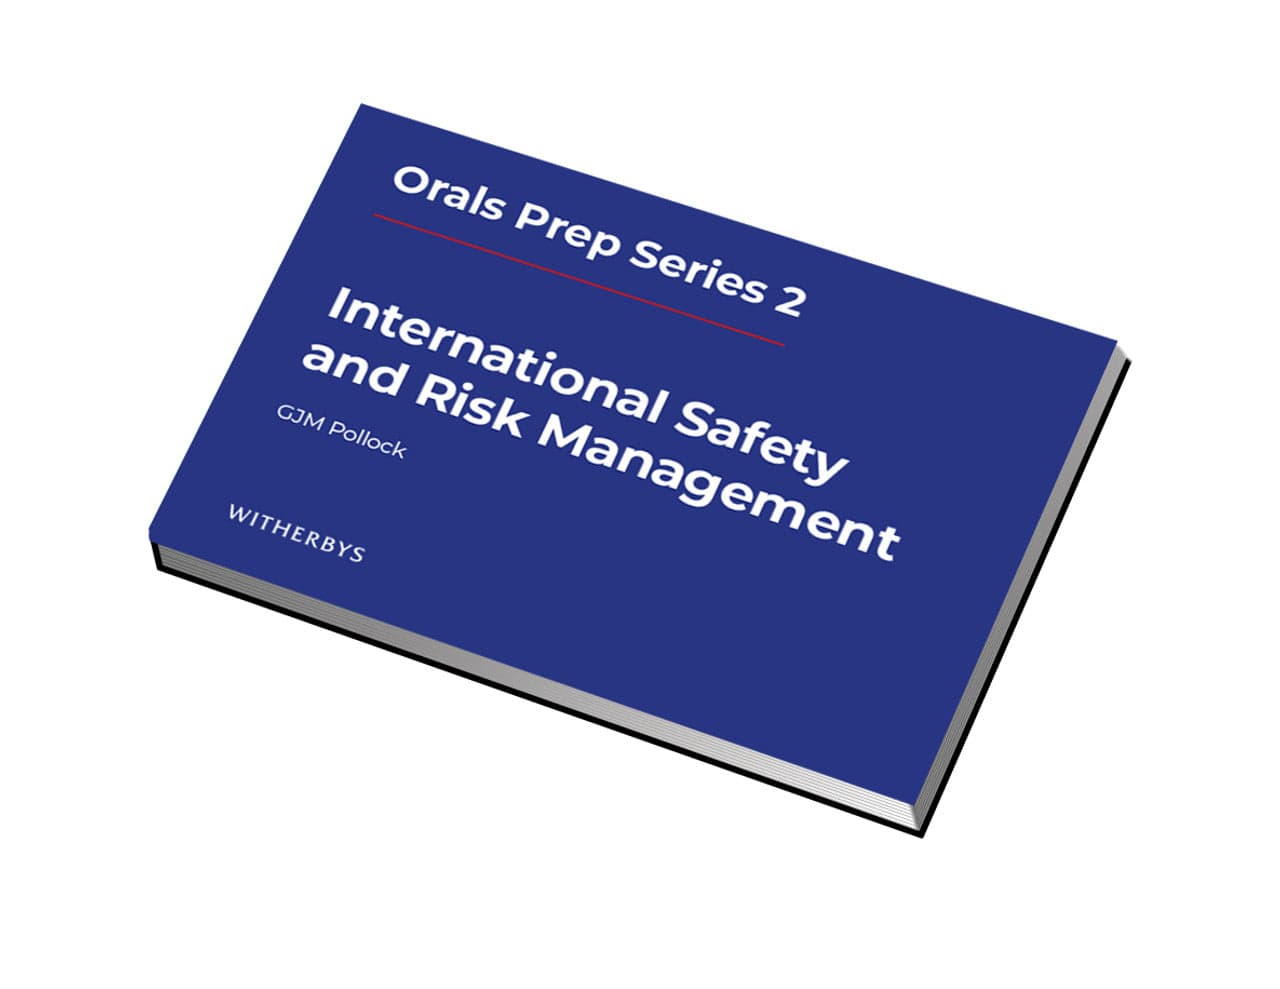 Orals Prep Series 2 - International Safety and Risk Management, 2023 Edition